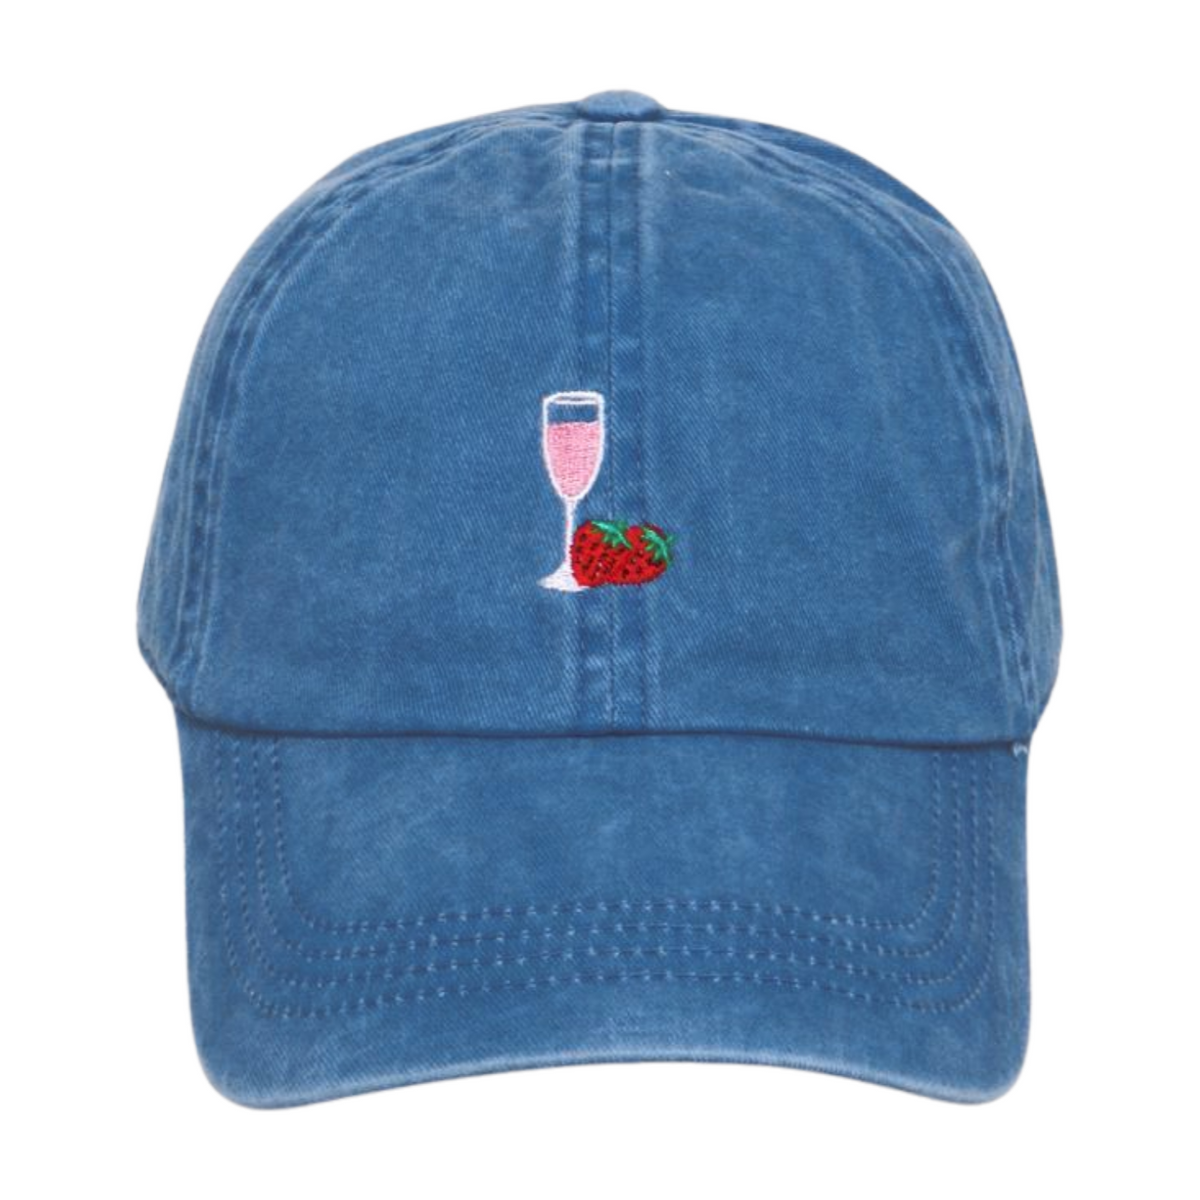 LCAP3634 - CHAMPAGNE & STRAWBERRY ICON EMBROIDERED BASEBALL CAP